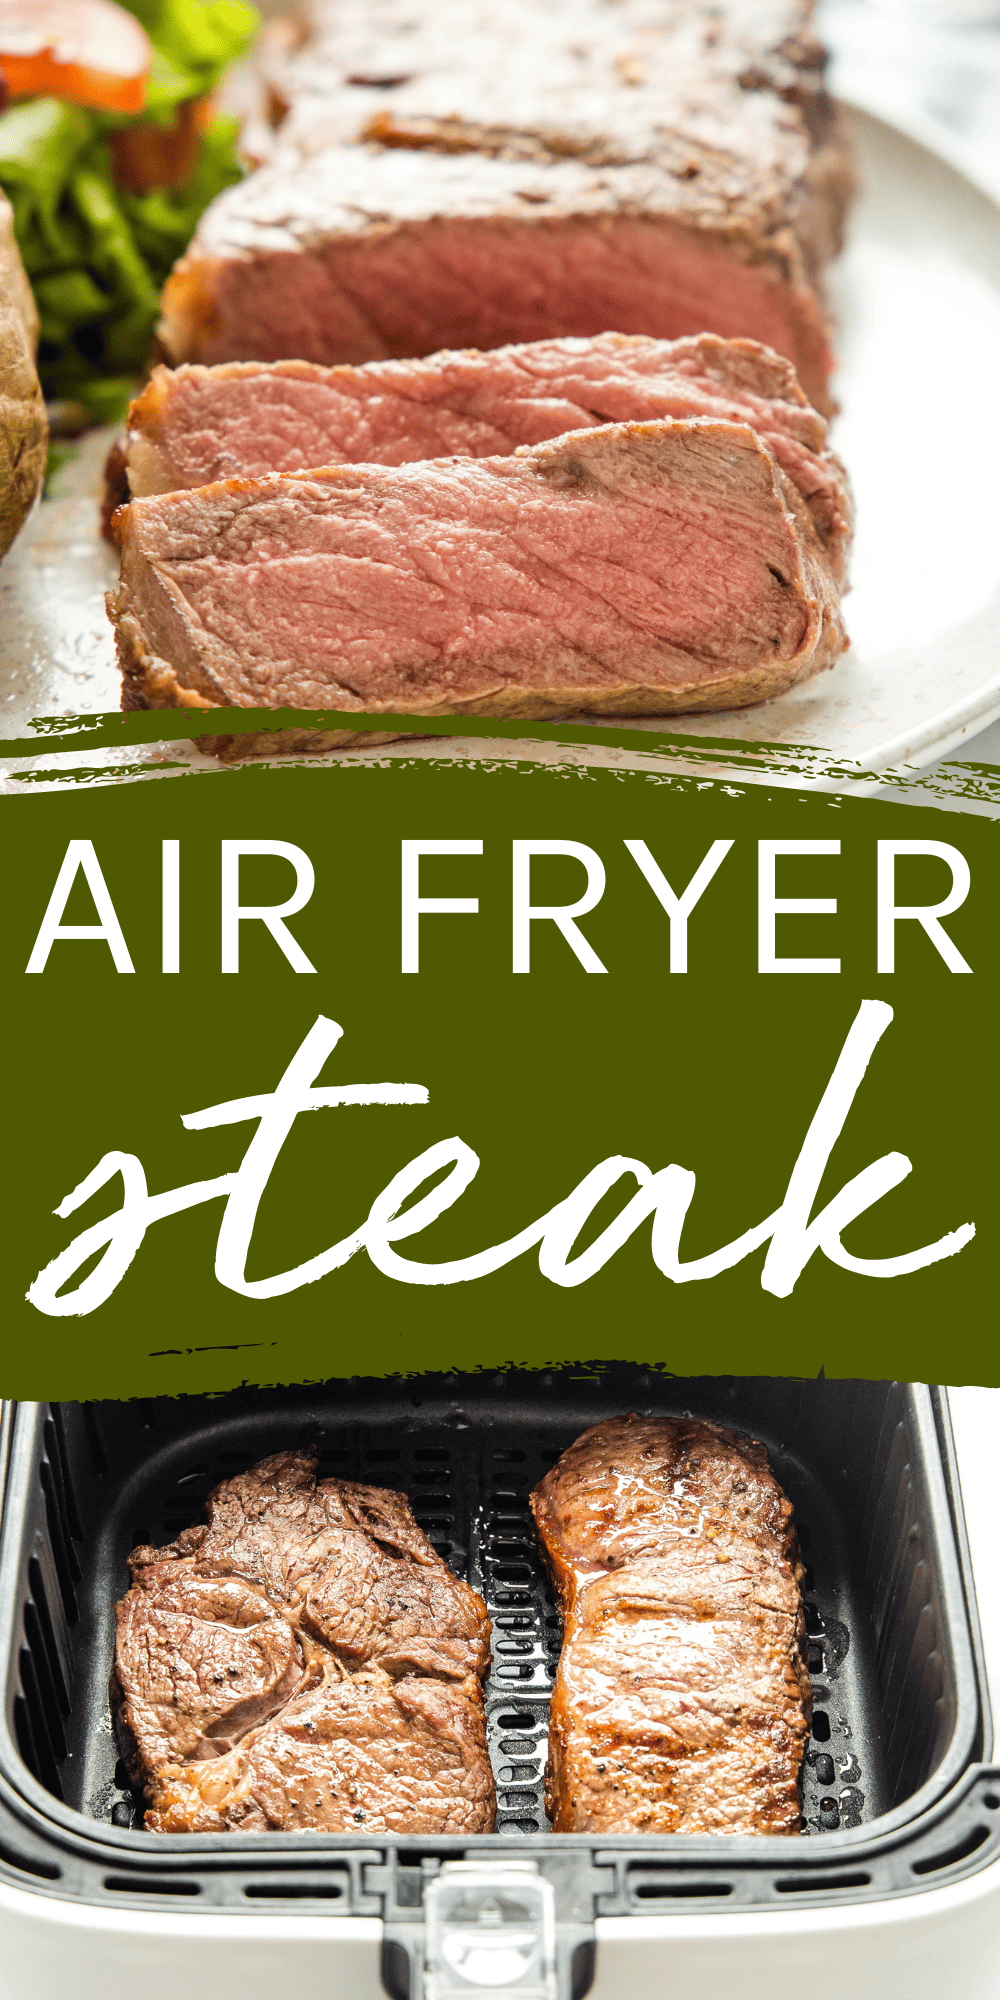 This Air Fryer Steak recipe is the best and easiest way to cook restaurant-quality steak at home in minutes using basic ingredients. Perfectly cooked steak that's juicy on the inside with perfect caramelization - a simple recipe with no-fail pro tips and tricks! Recipe from thebusybaker.ca! #airfryersteak #easysteakrecipe #steak #howtocooksteak #beststeakrecipe #homemadesteak #easysteak #sirloinsteak #ribeyesteak #airfryerrecipe #airfryerdinner #airfryer #easyrecipe #easydinner #easymeal via @busybakerblog